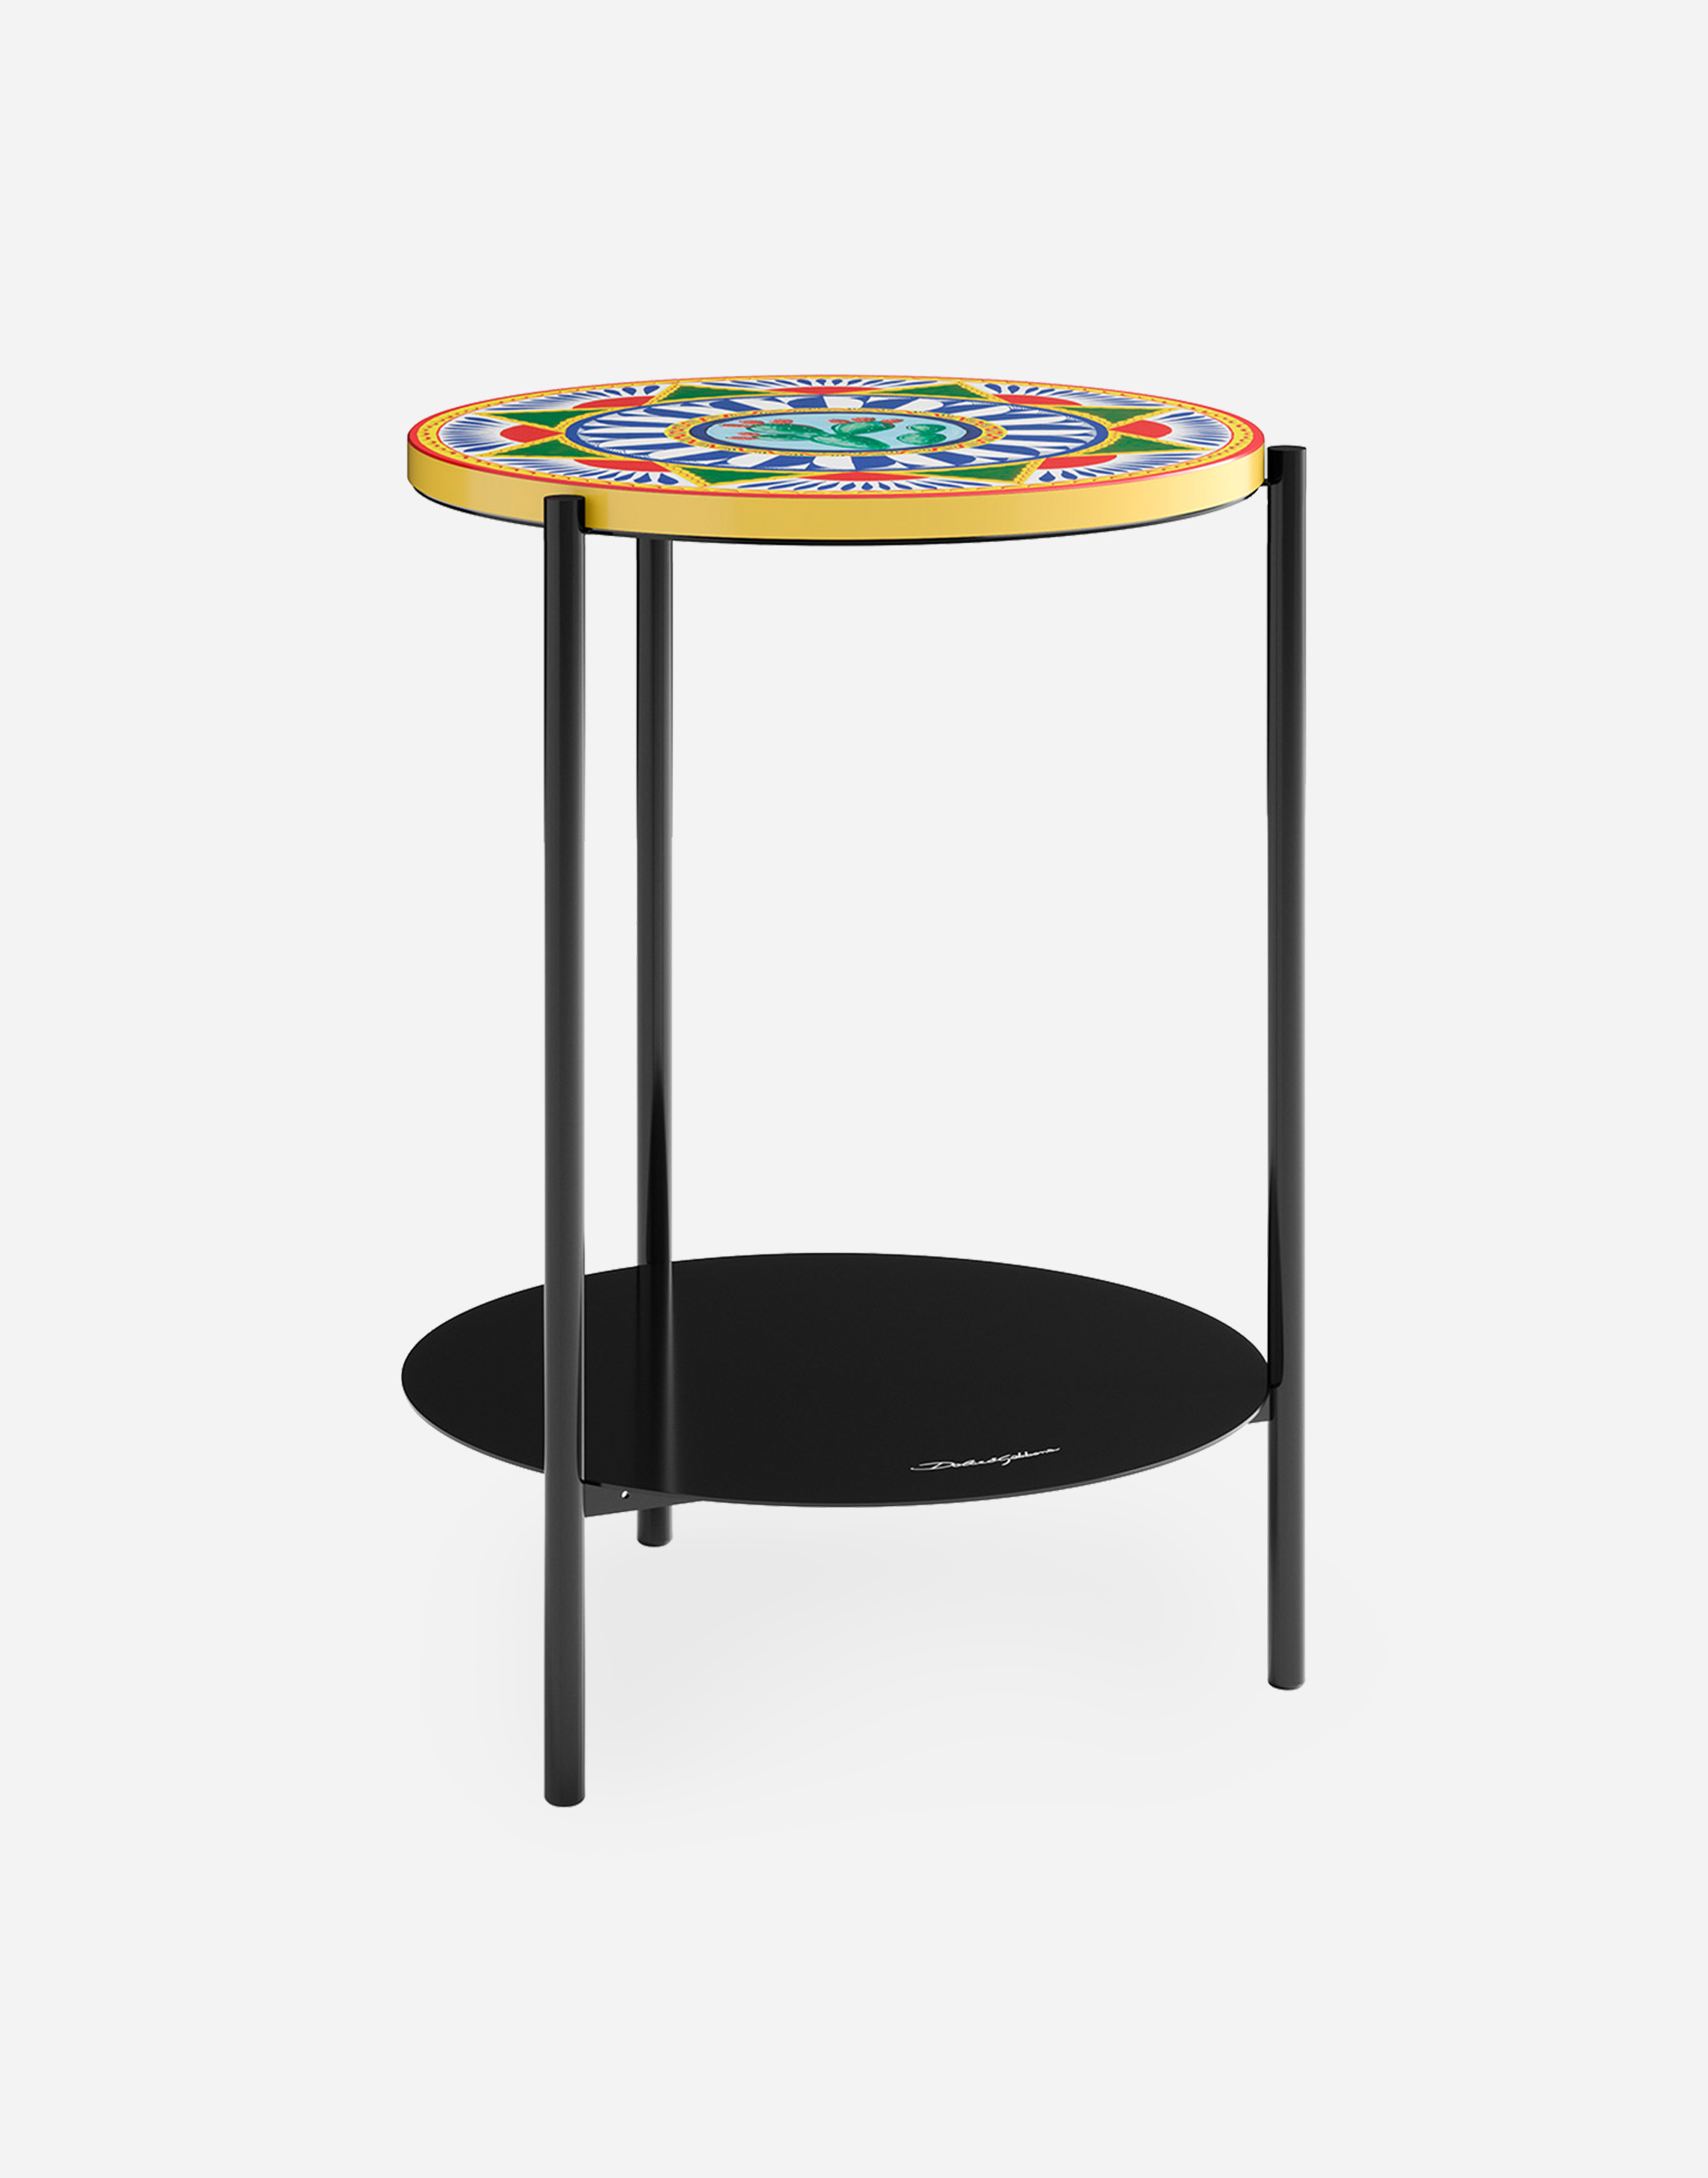 Amore coffee table in Multicolor